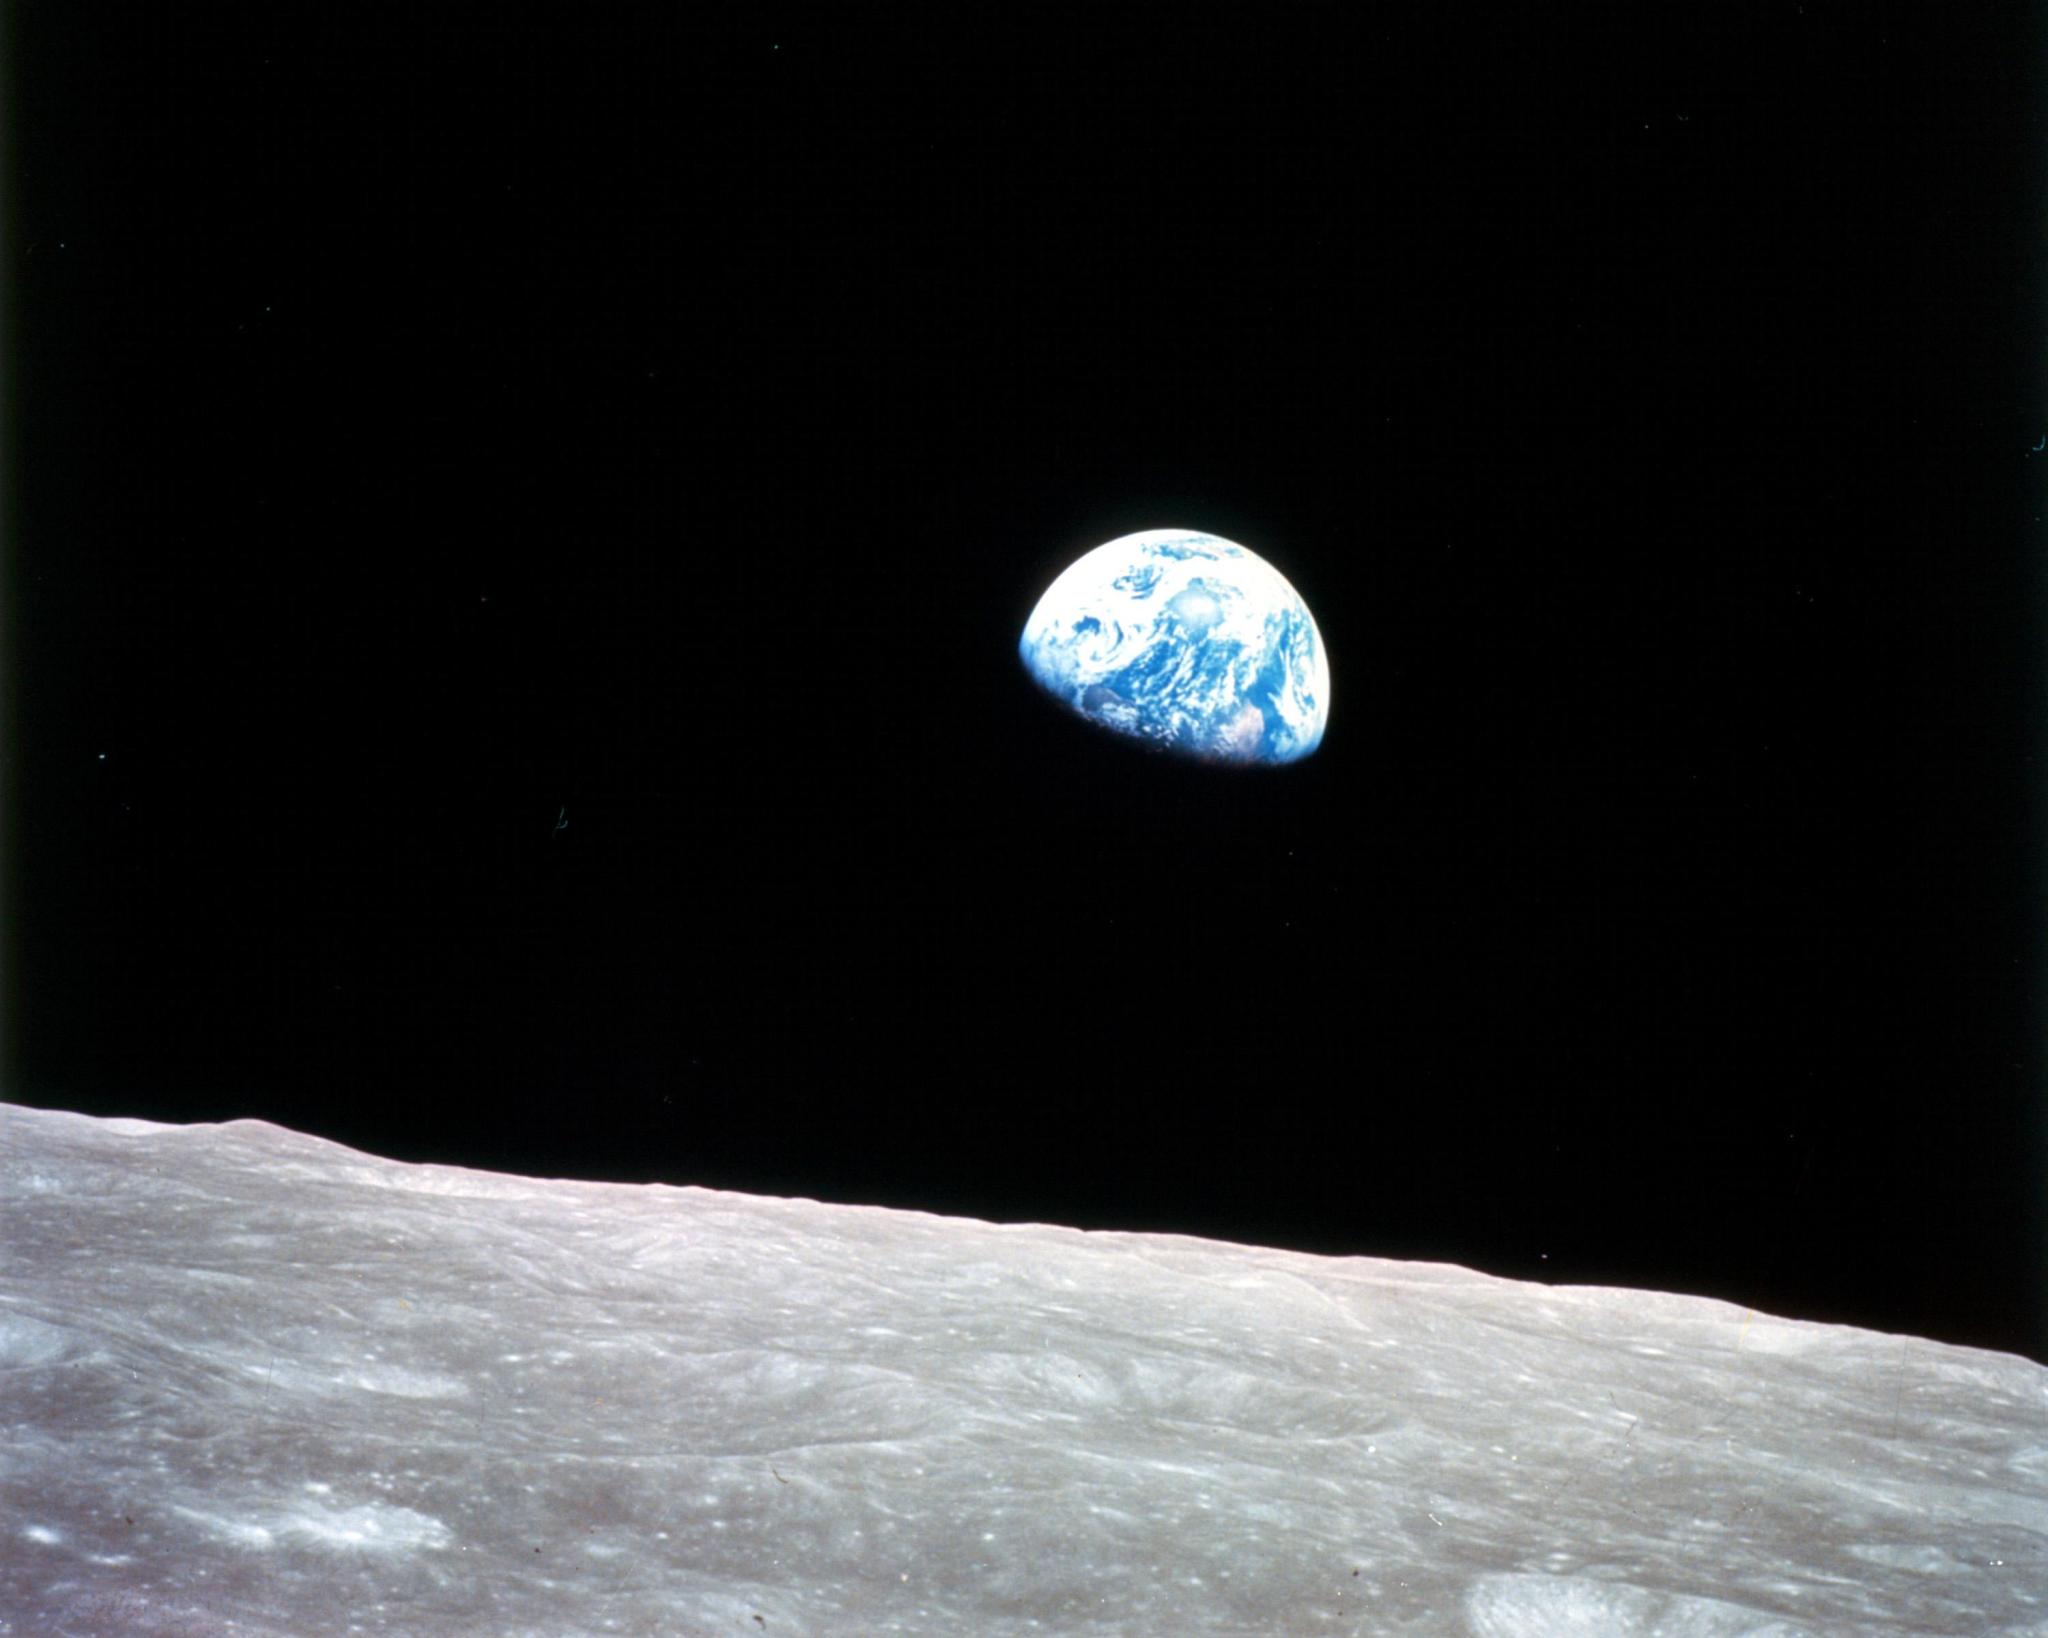 The Earth appearing over the horizon of the Moon.